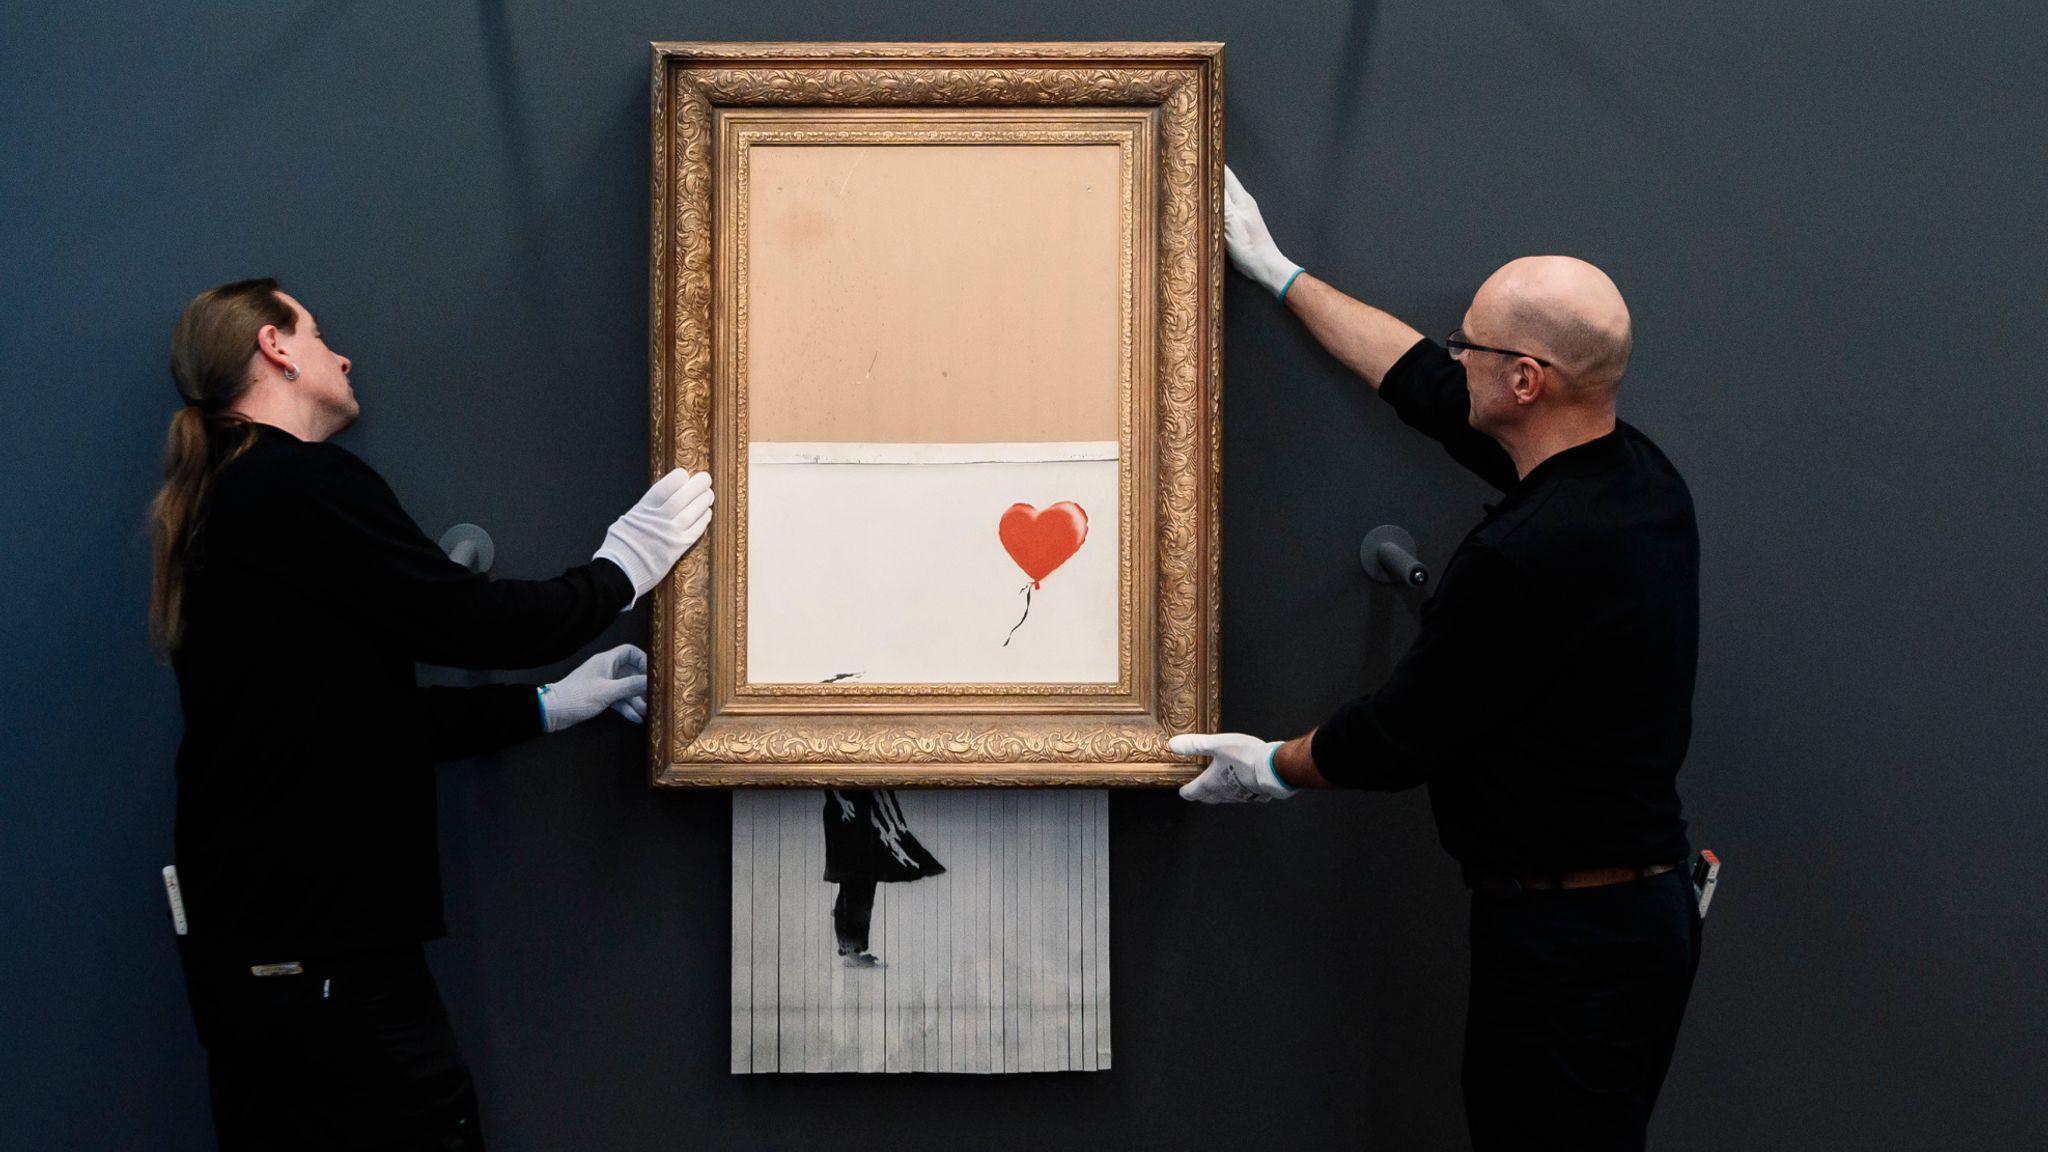 All of Heart's 19 paintings sold out on opening day